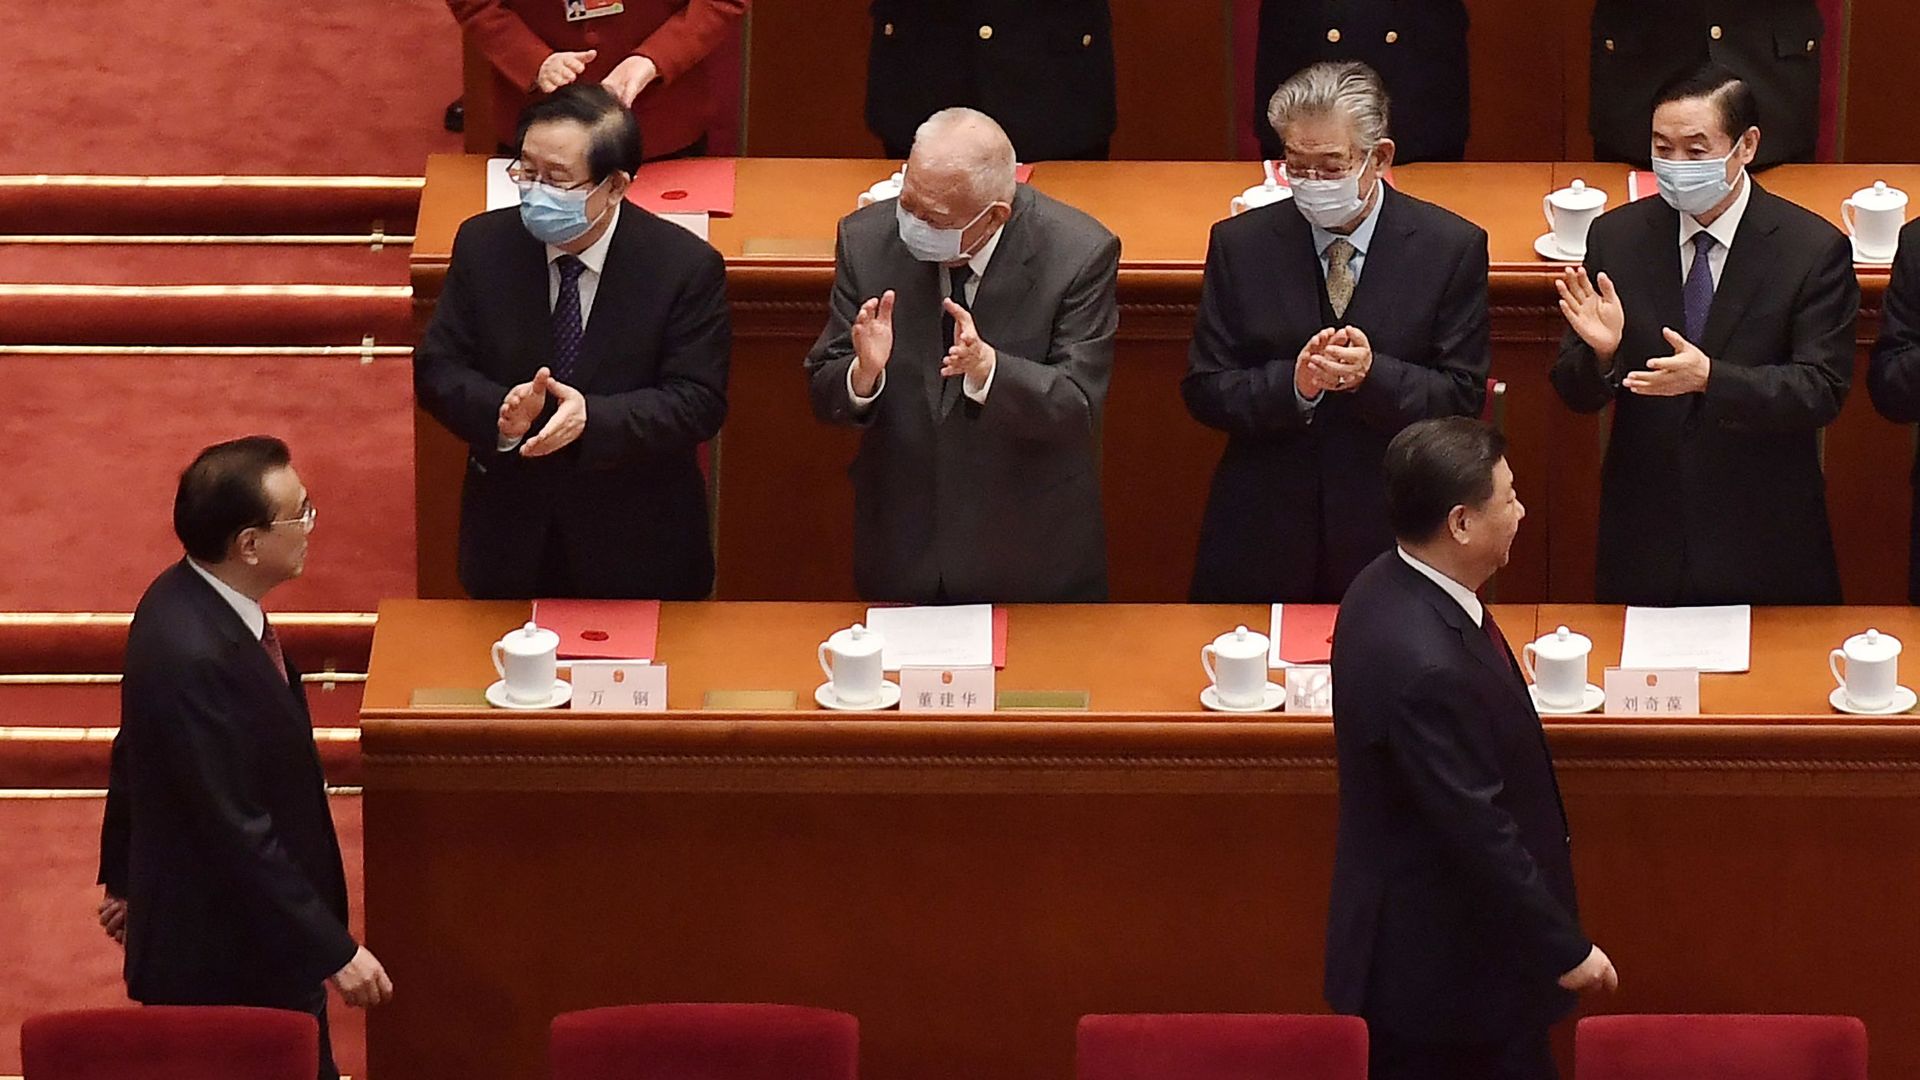  China's President Xi Jinping (R) and Premier Li Keqiang are applauded by delegates in the Beijing Parliament on March 11